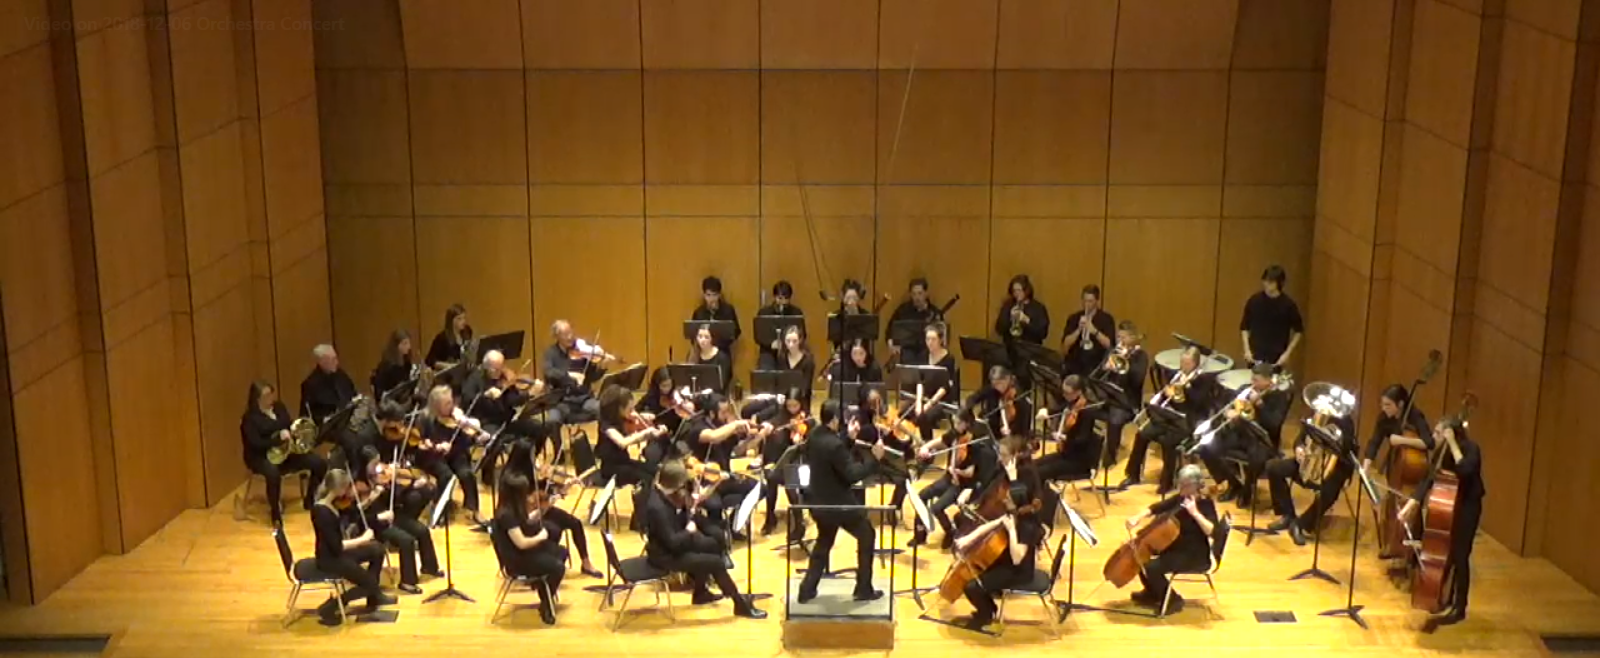 A view of the orchestra playing on stage at Conn.